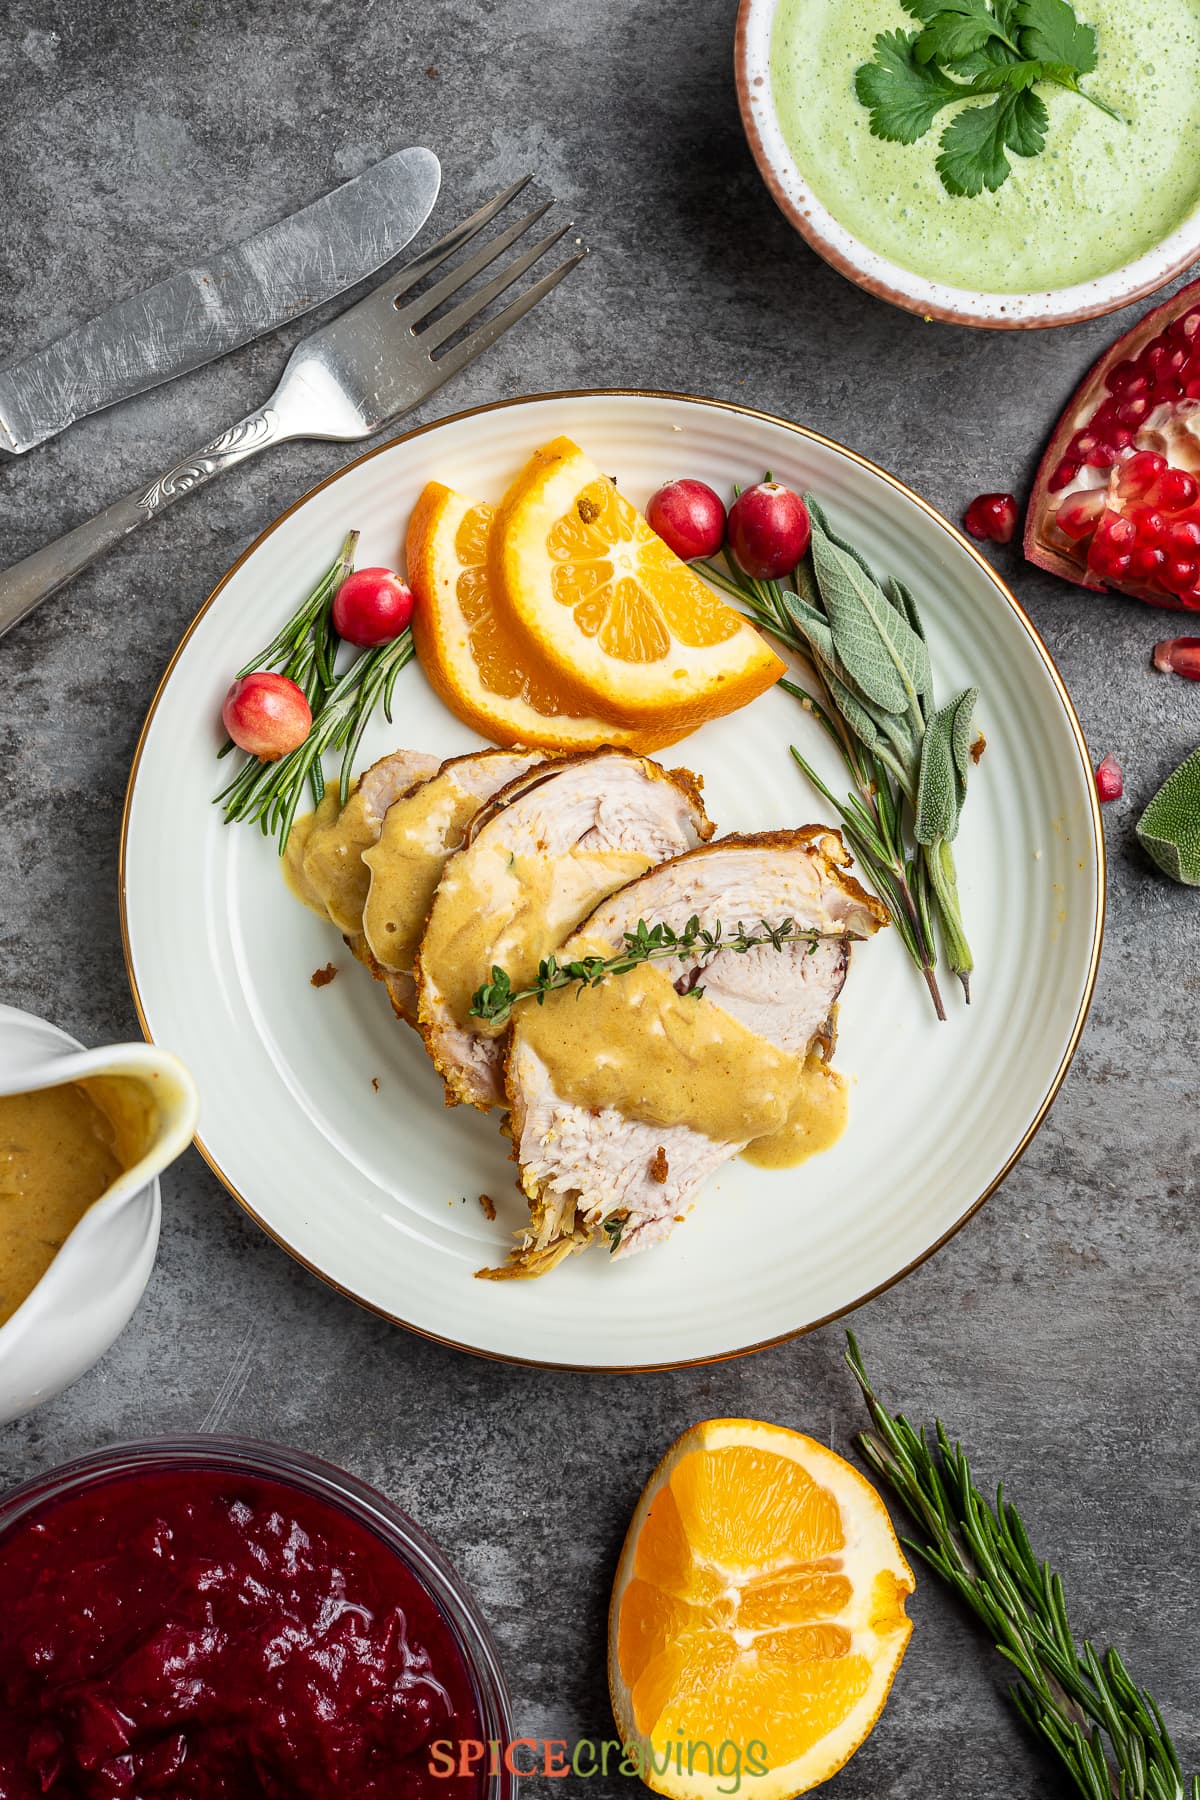 four slices turkey breast on white plate with orange slices, cranberrries, fresh herbs